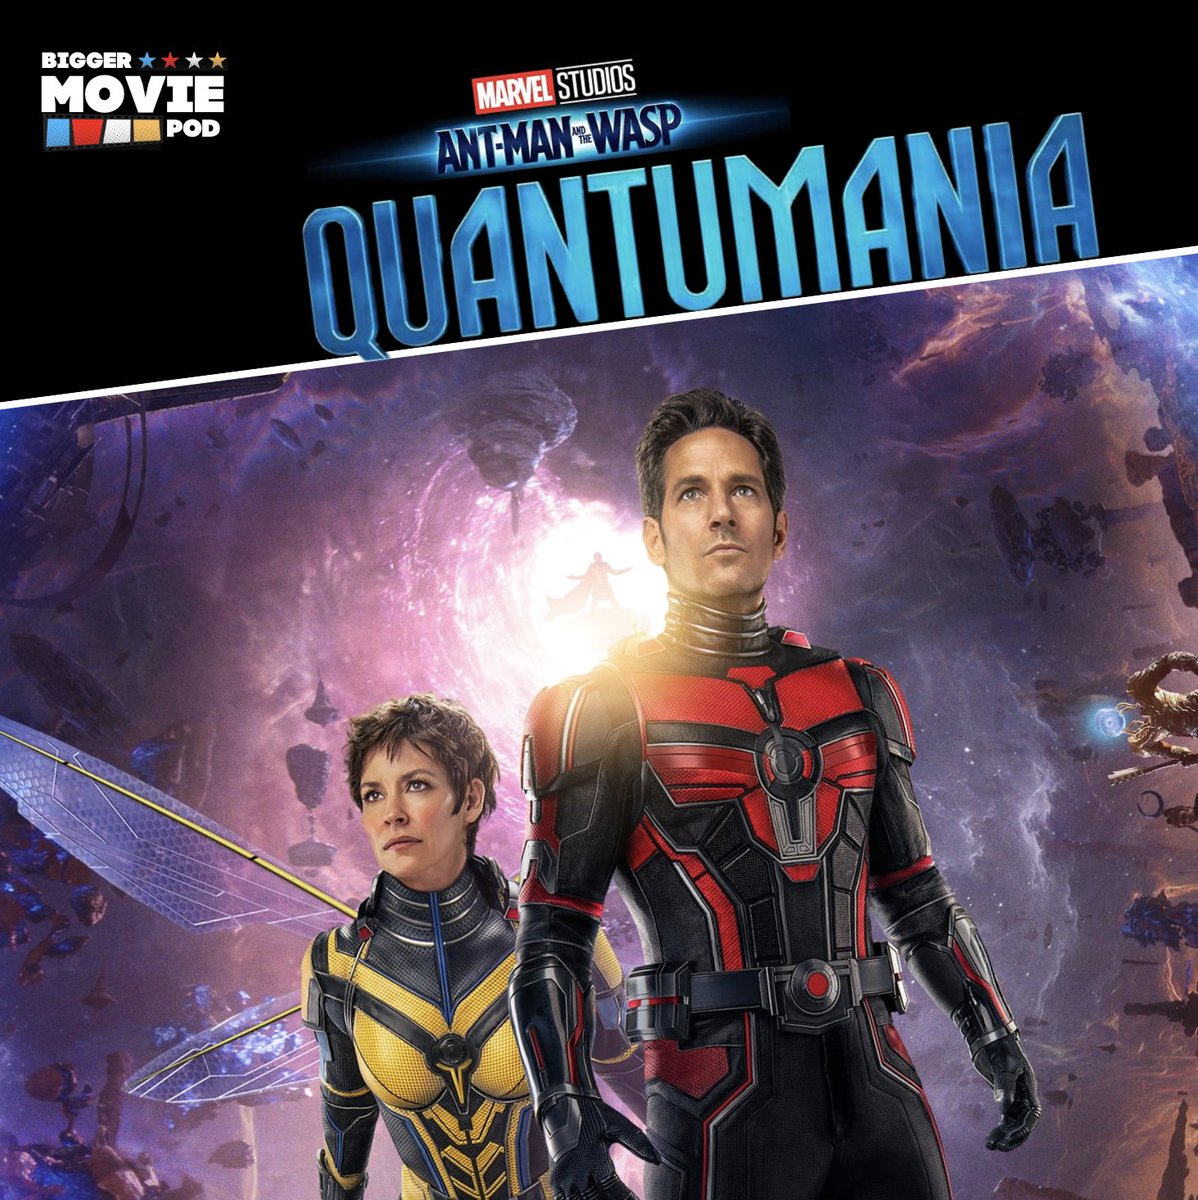 LATEST EPISODE 
💙❤🤍🧡 

Letter Q = Quantumania 

Listen to our latest episode,rate, subscribe and get involved 👍 

#ComicBookFilm #MovieReview #BiggerMoviePod #PodcastRecommendations #moviepodcast #Paulrudd #Quantumania #Antman #Marvel #MarvelStudios

open.spotify.com/episode/3TeNmm…